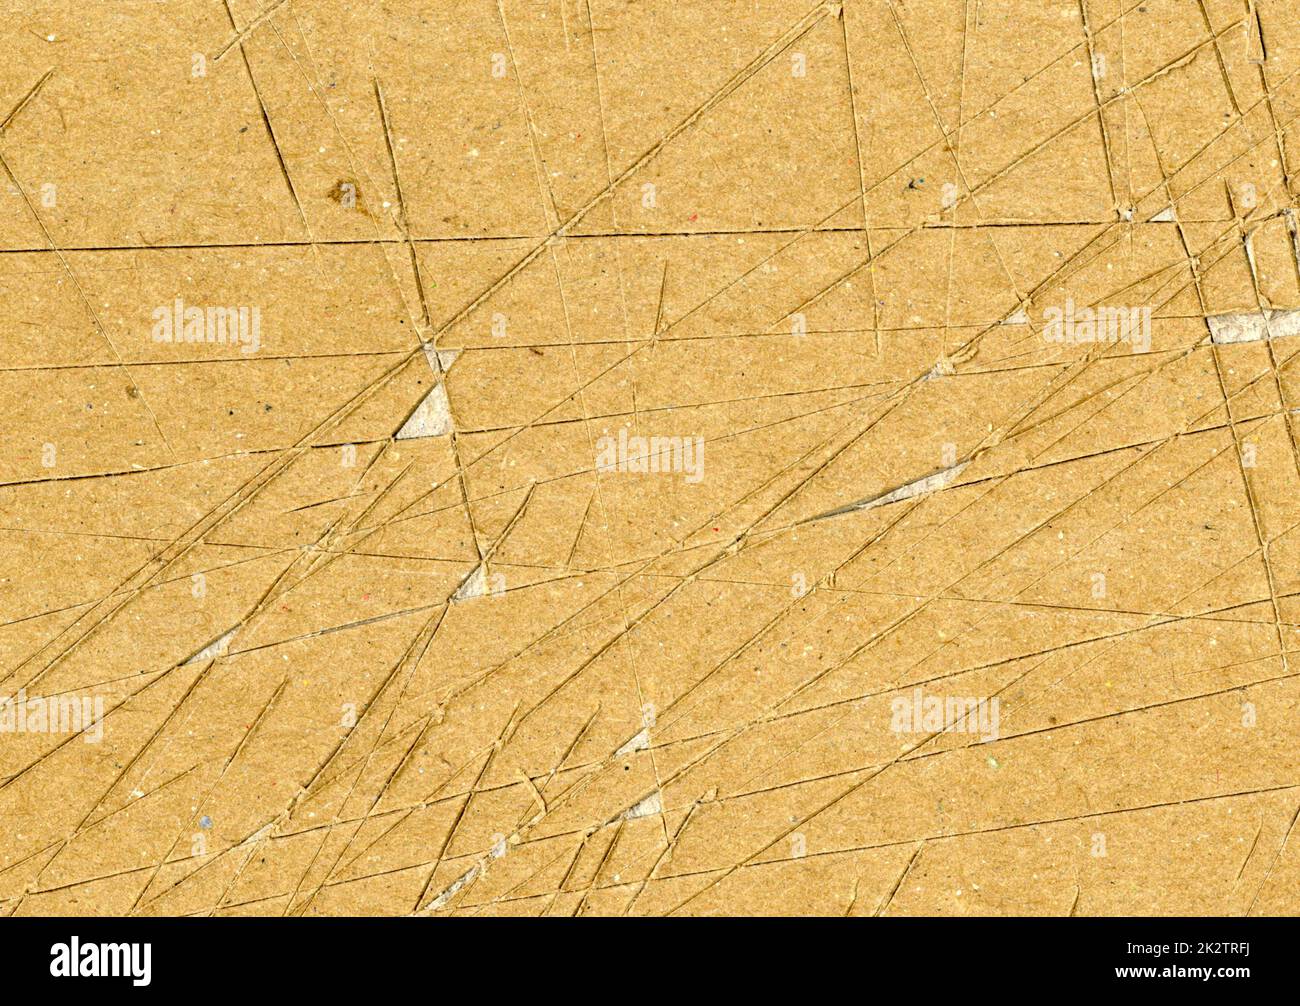 Small: Highly detailed close up brown paper board texture with many knife cut marks and scratches worn down, used grunge fine grain layered cardboard with torn surface for wallpaper design Stock Photo